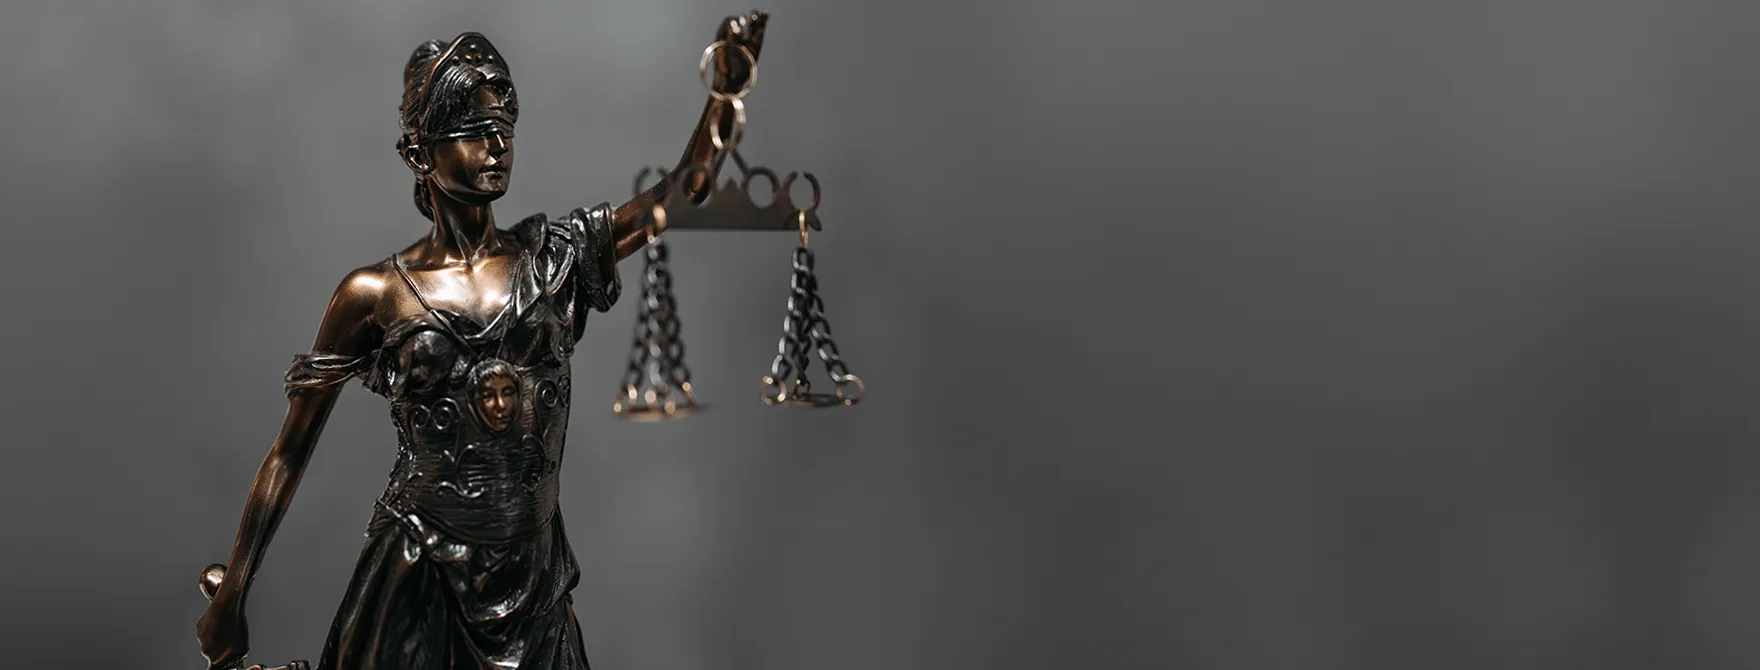 A Lady Justice statue standing in front of a blurry, gray background